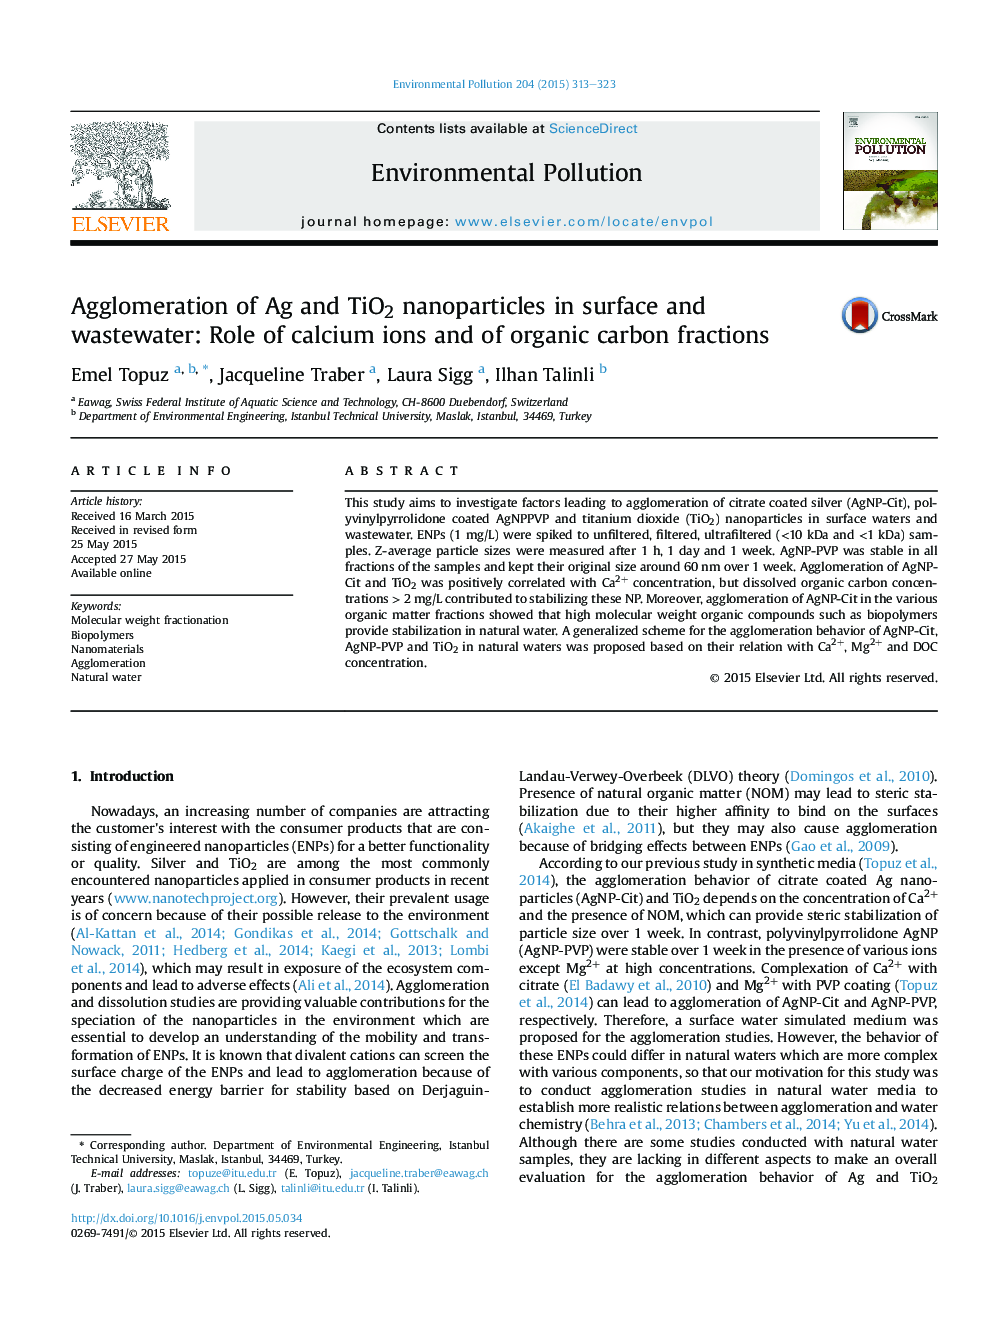 Agglomeration of Ag and TiO2 nanoparticles in surface and wastewater: Role of calcium ions and of organic carbon fractions